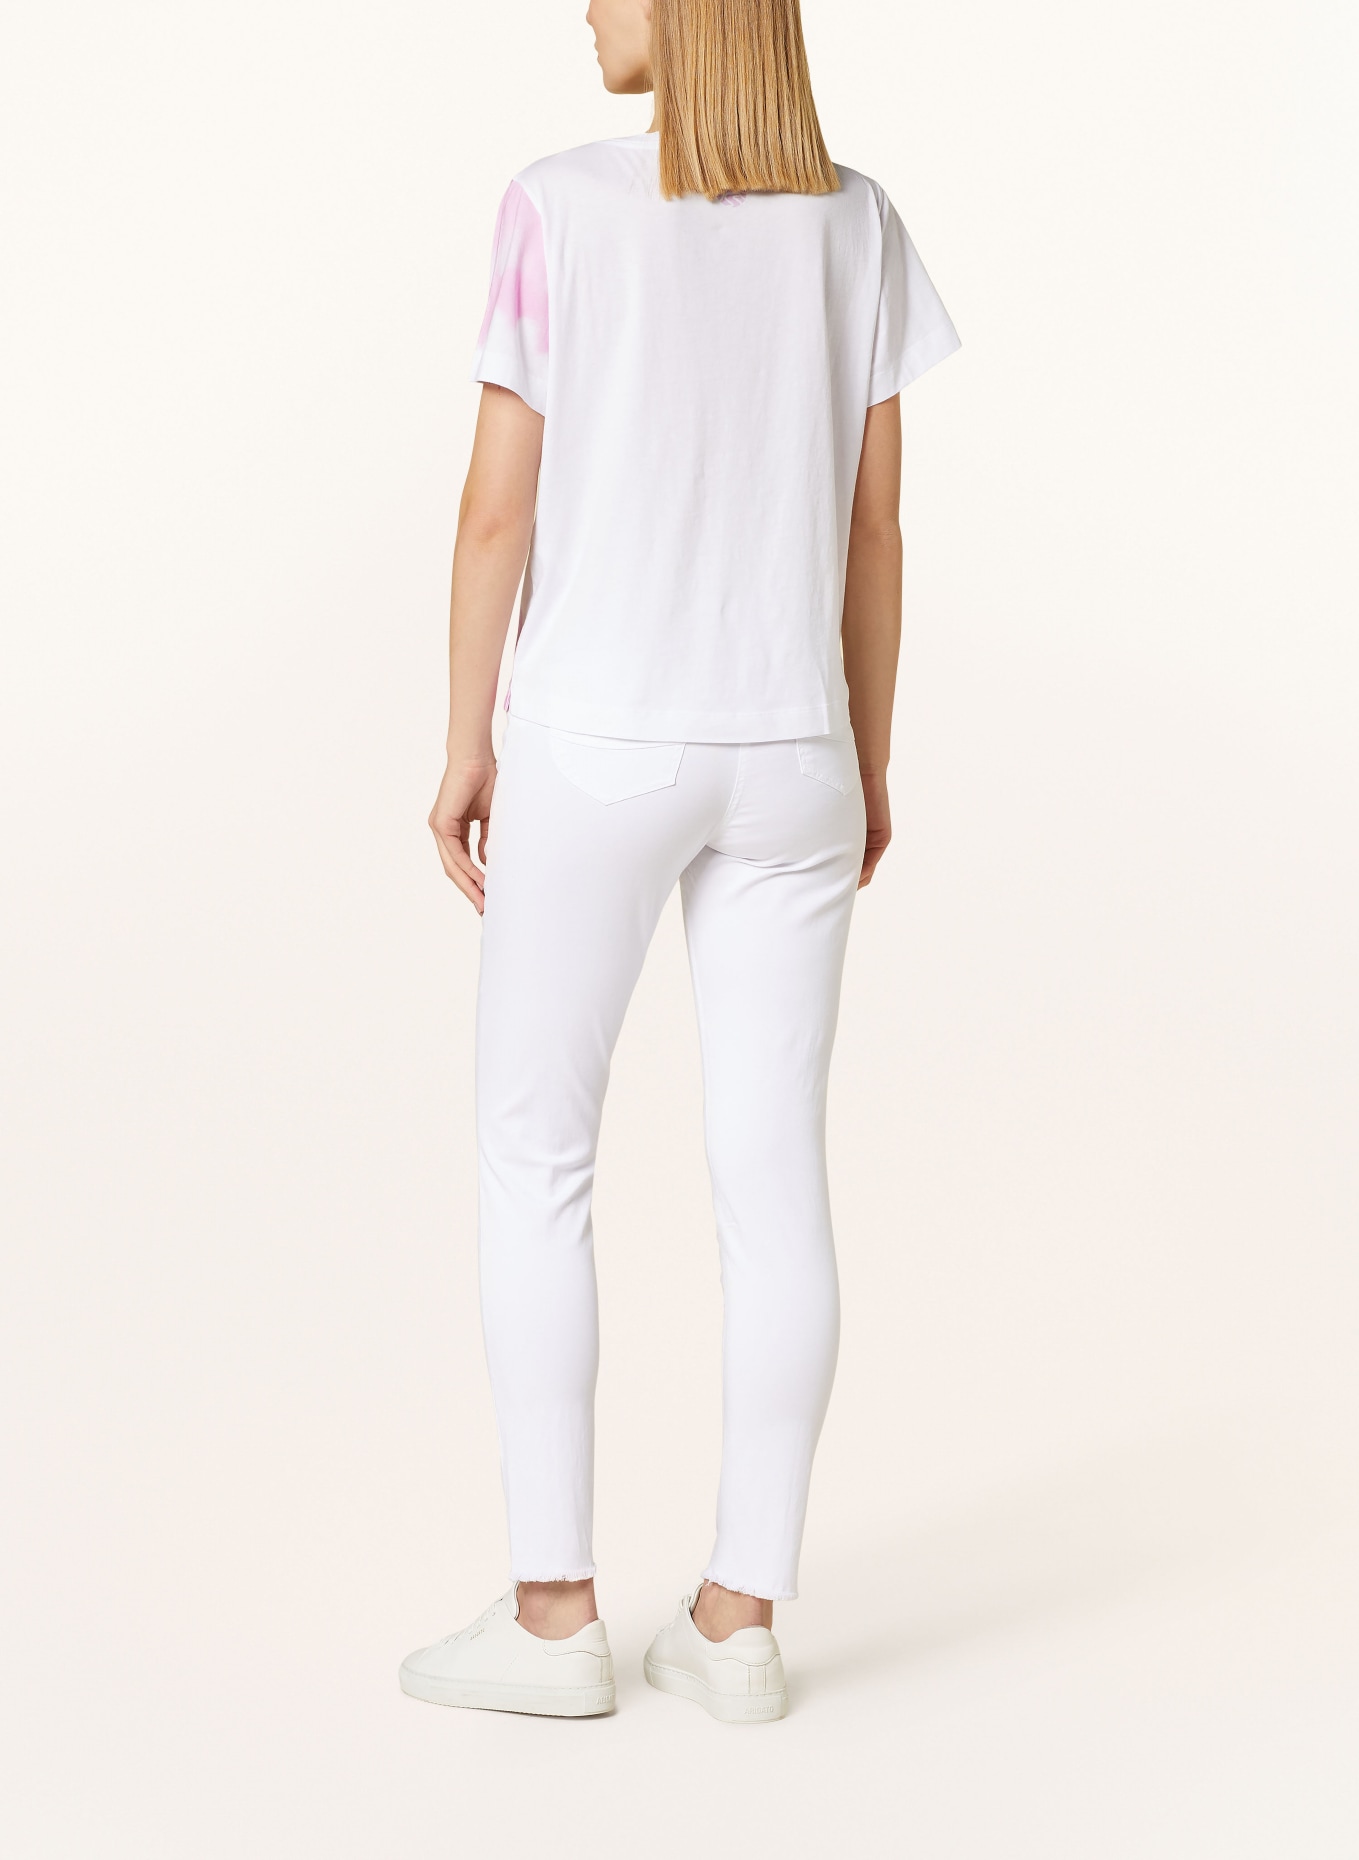 ULLI EHRLICH SPORTALM T-shirt with sequins, Color: WHITE/ PINK (Image 3)